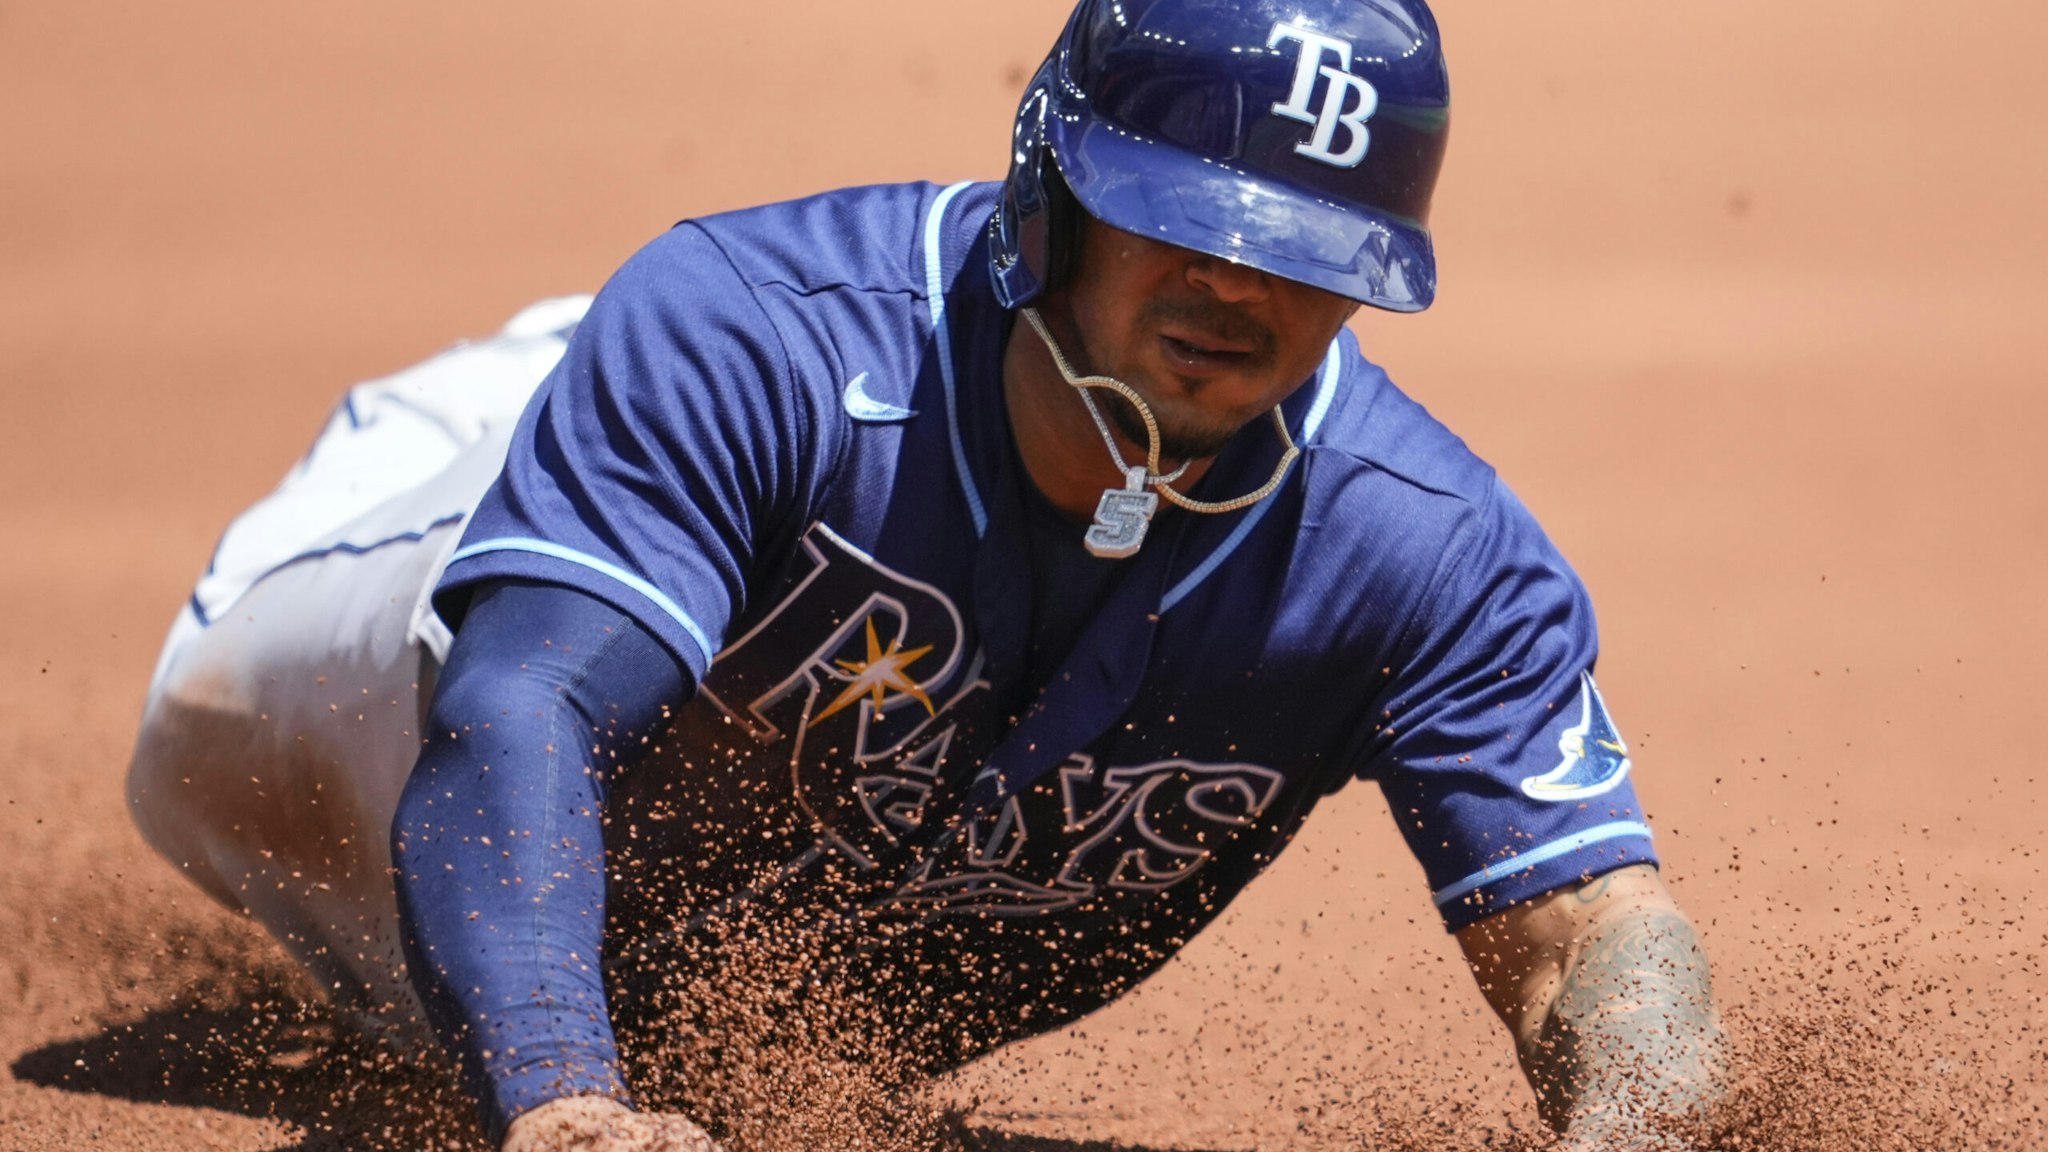 Tampa Bay Rays star Wander Franco had $650,000 worth of jewelry stolen from his Rolls-Royce SUV